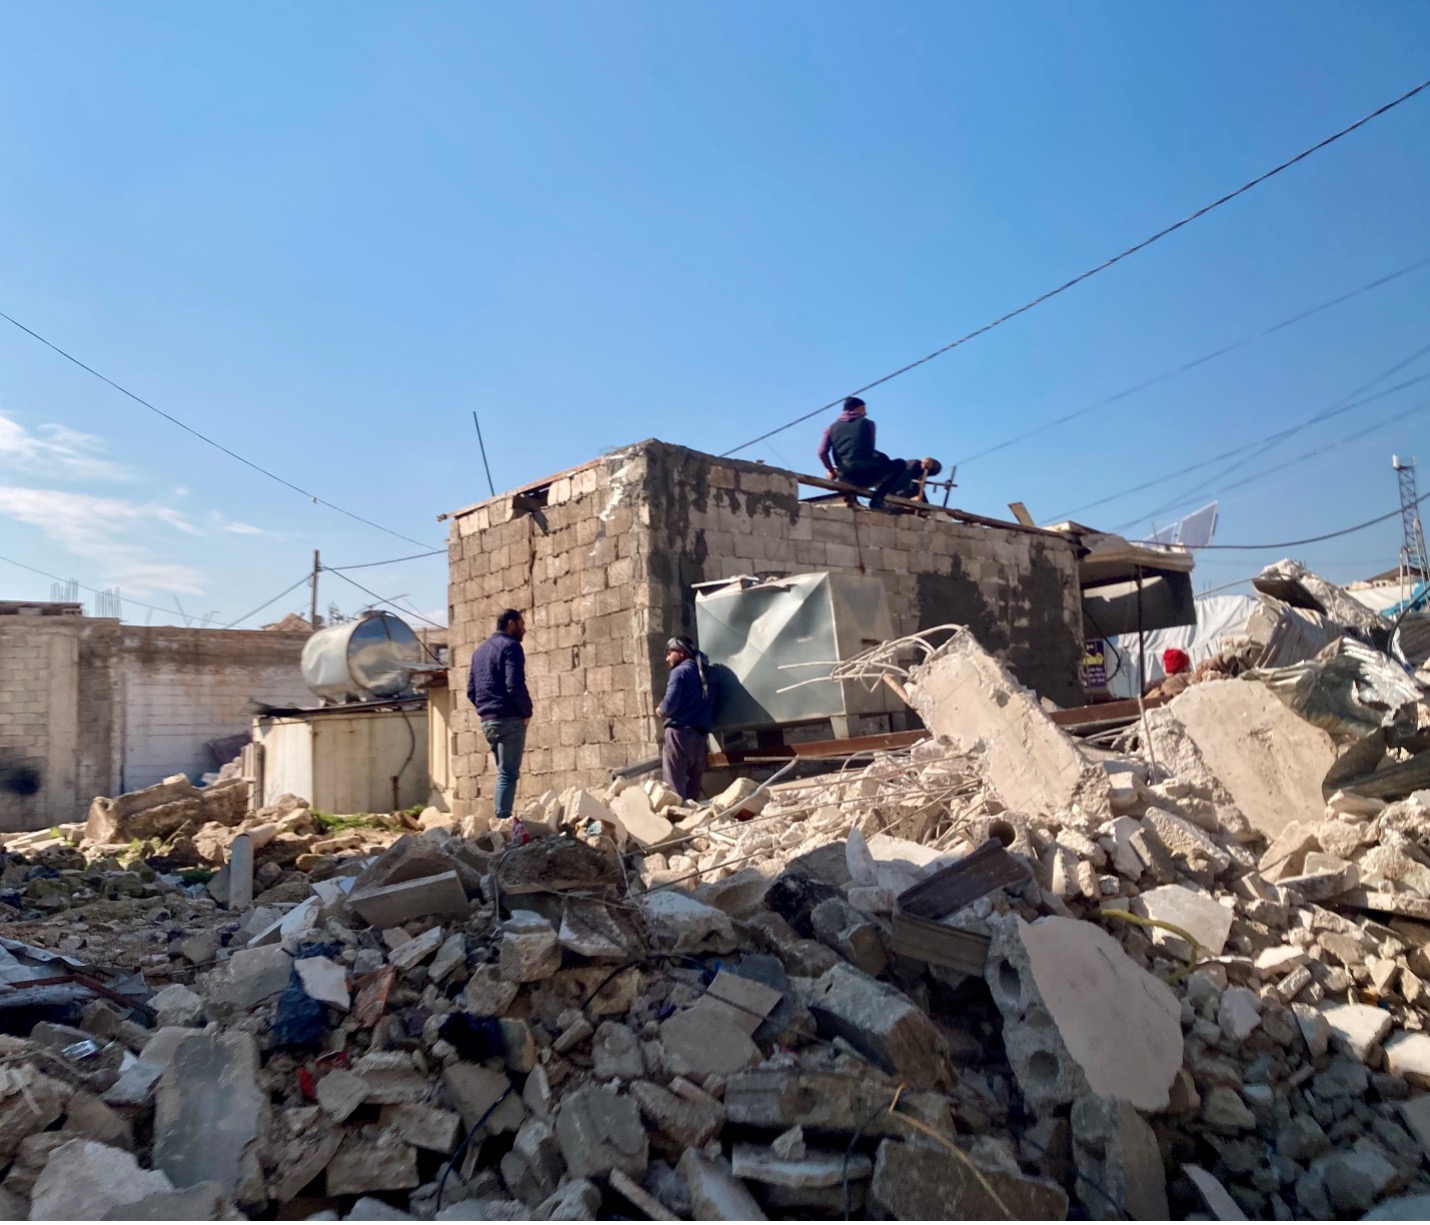 Only a week after the quake, communities had already come together to repair the cracked walls and foundations of their homes. In Atareb, locals re-cement a small building that remained standing amid a sea of destruction. 